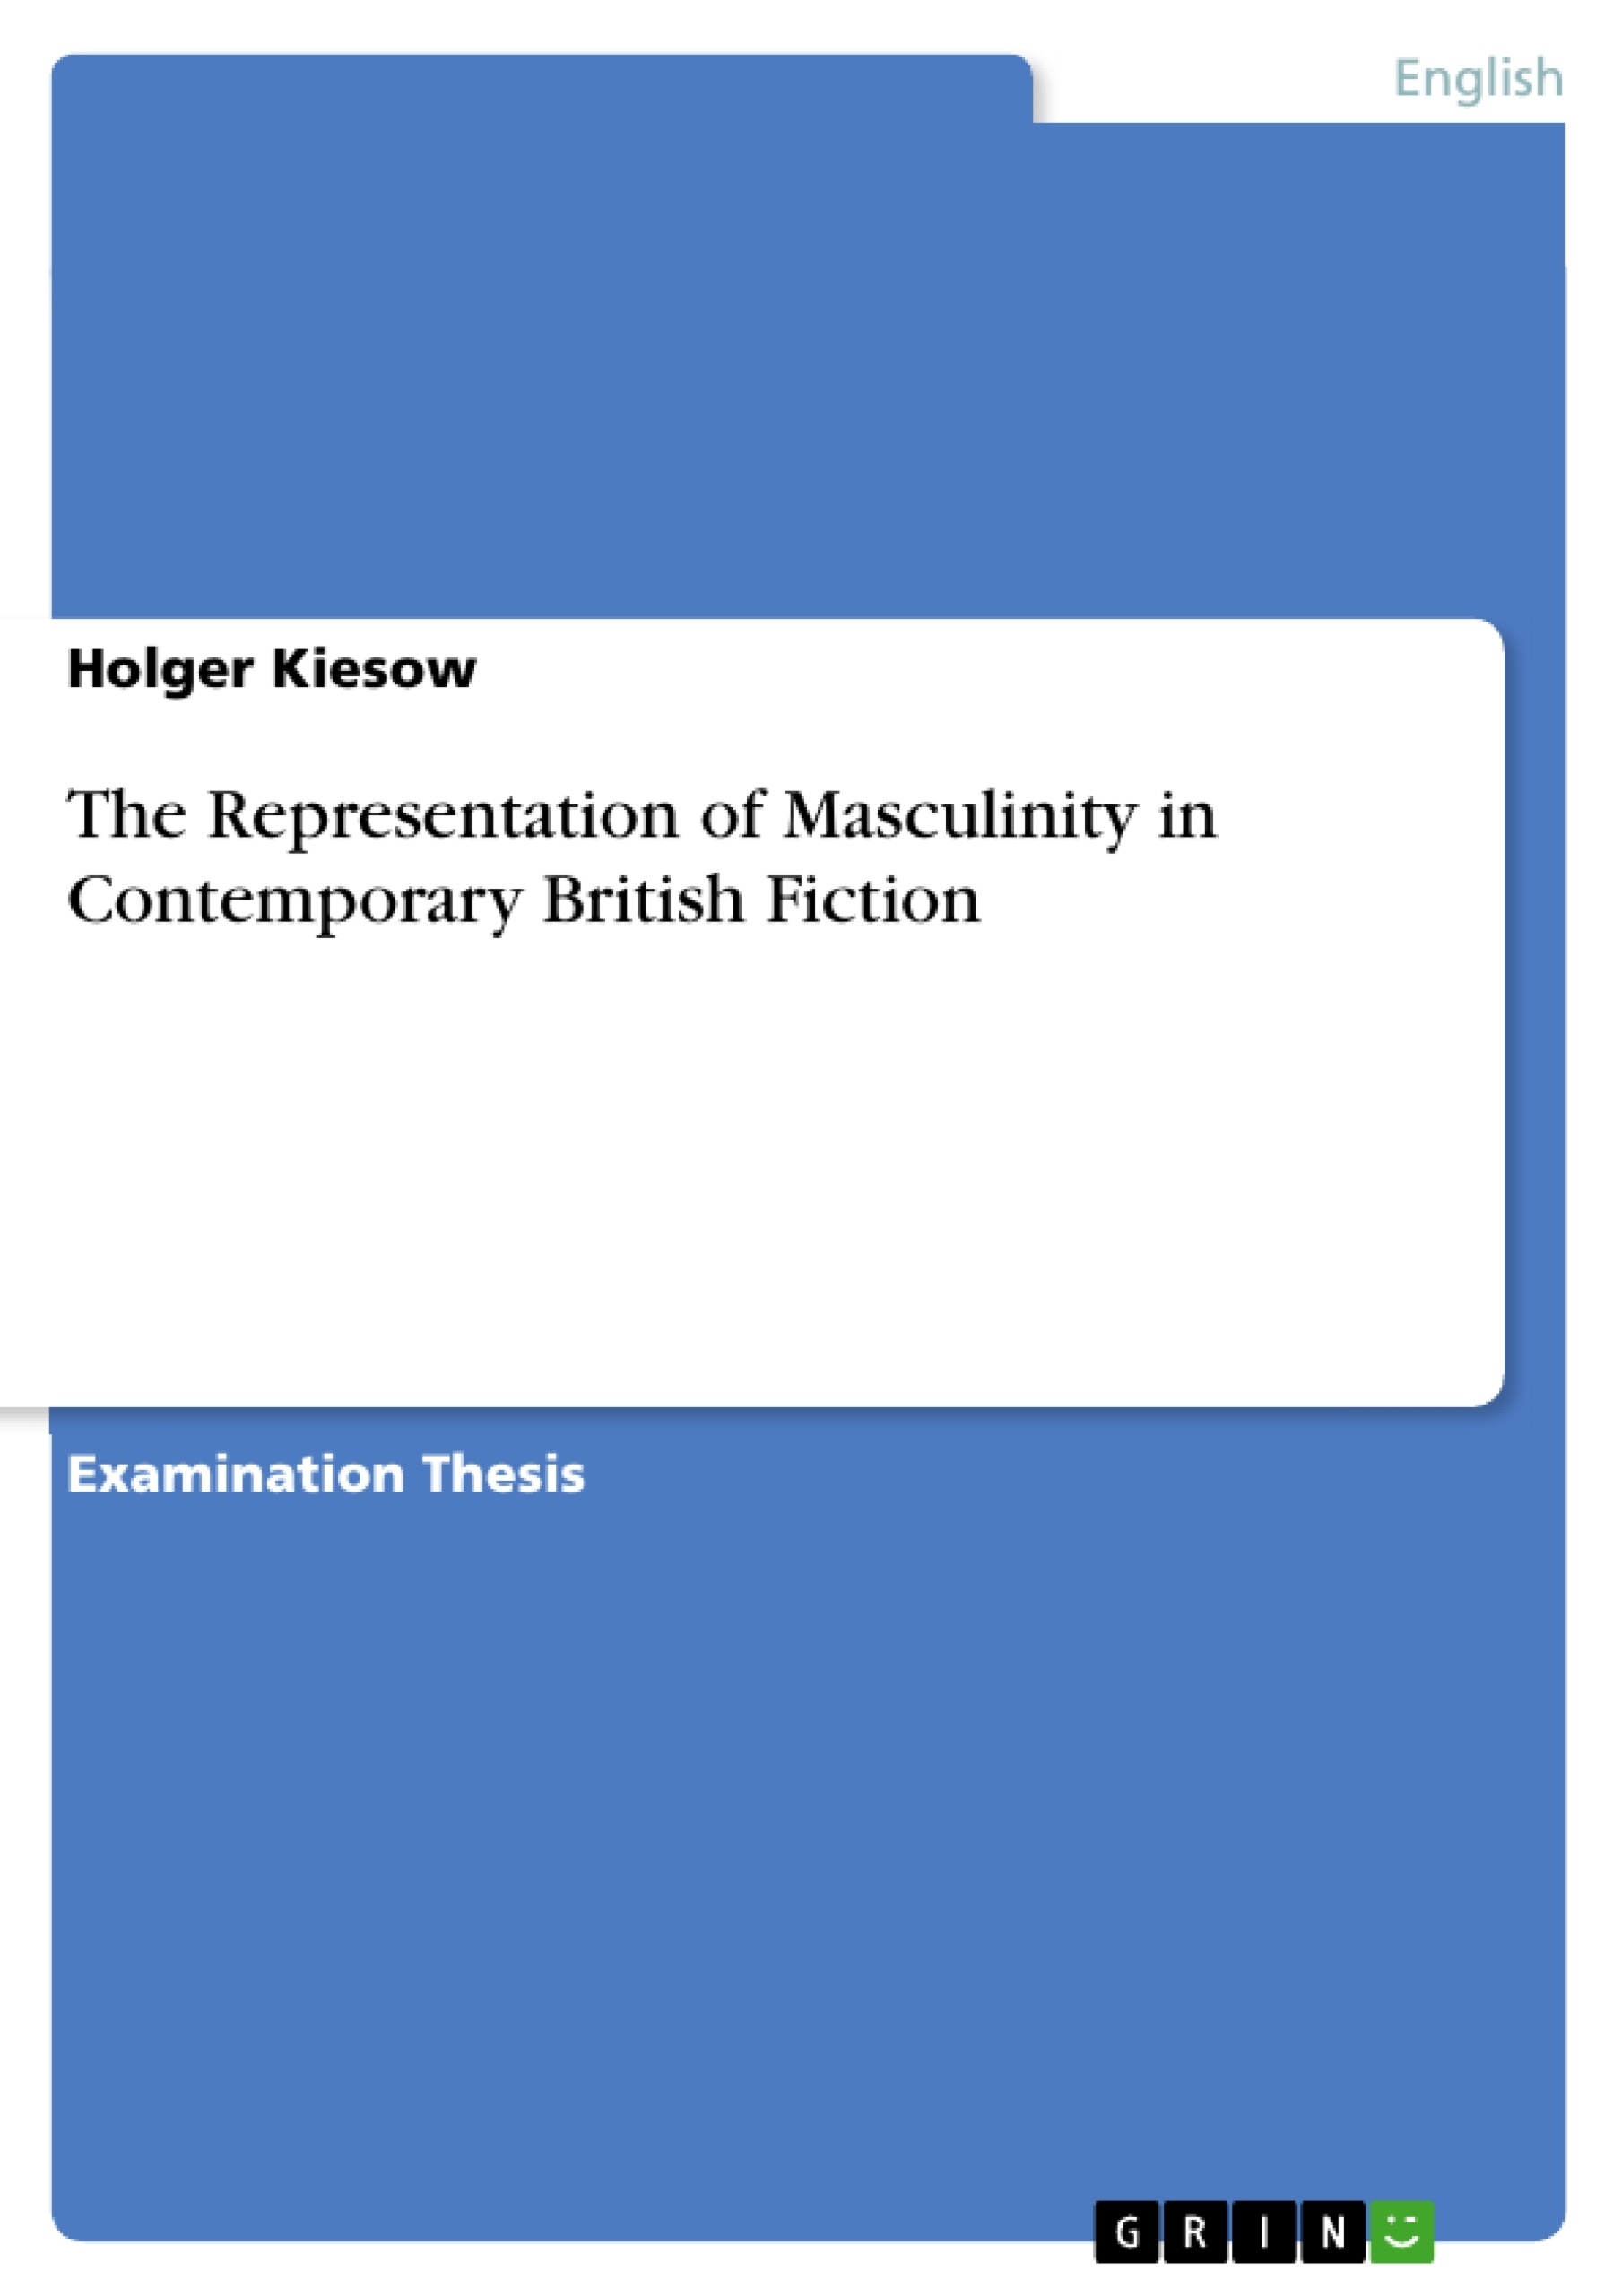 Título: The Representation of Masculinity in Contemporary British Fiction